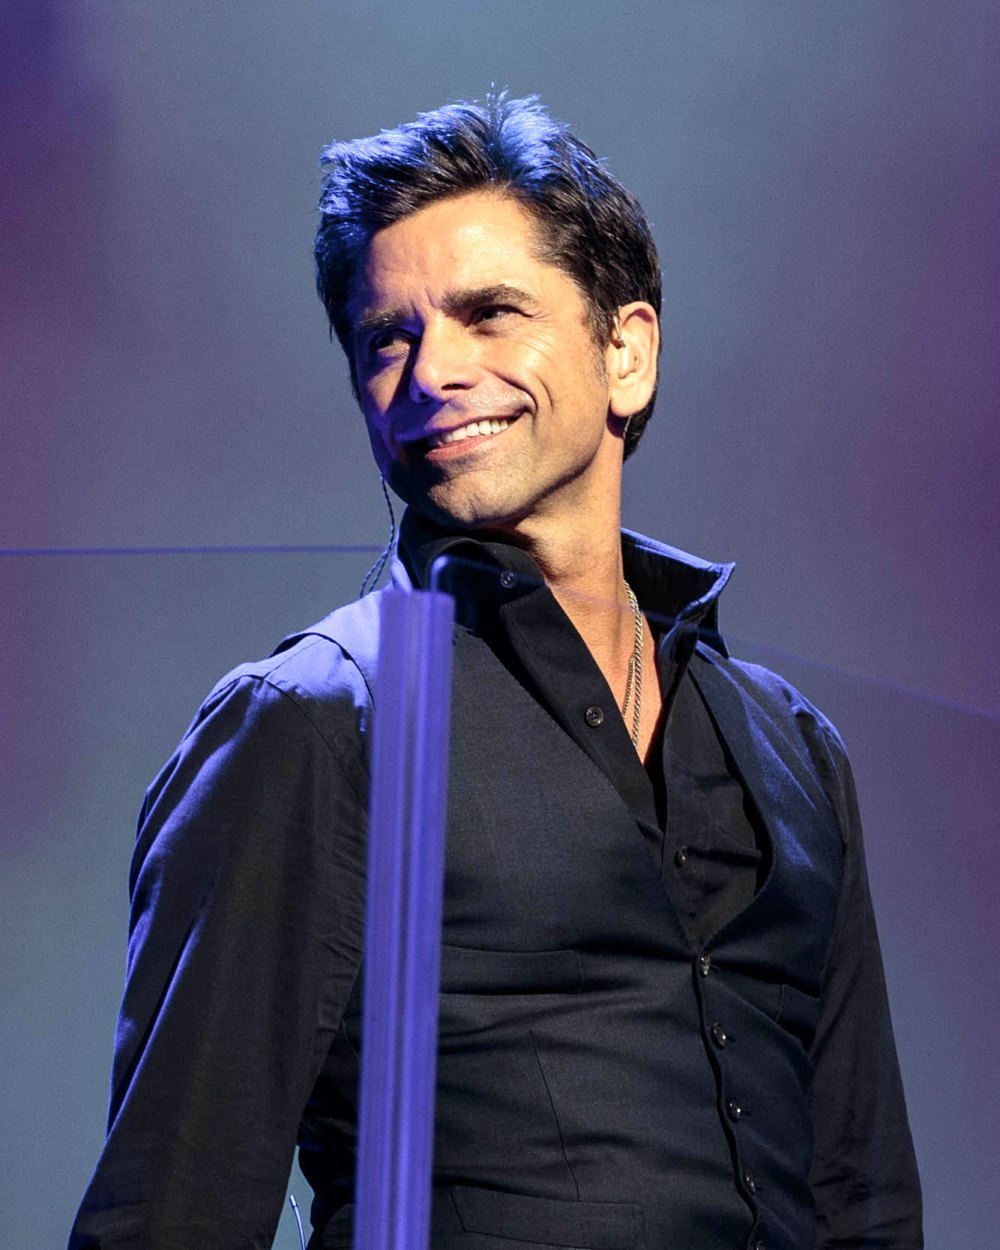 Have Mercy! John Stamos Rips Pants During Live Performance